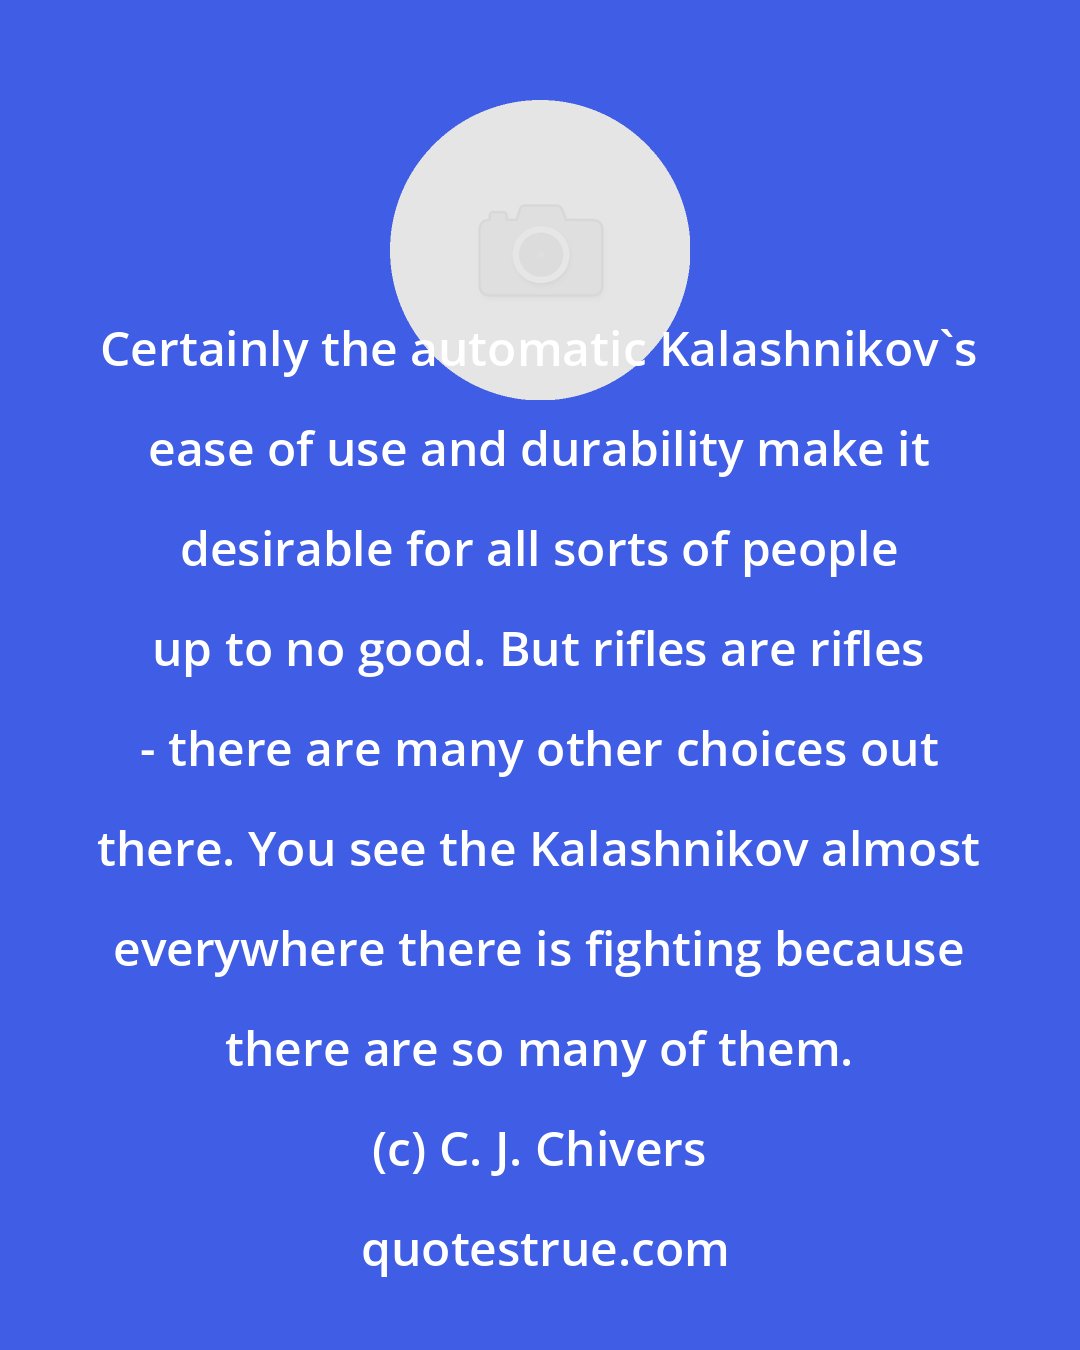 C. J. Chivers: Certainly the automatic Kalashnikov's ease of use and durability make it desirable for all sorts of people up to no good. But rifles are rifles - there are many other choices out there. You see the Kalashnikov almost everywhere there is fighting because there are so many of them.